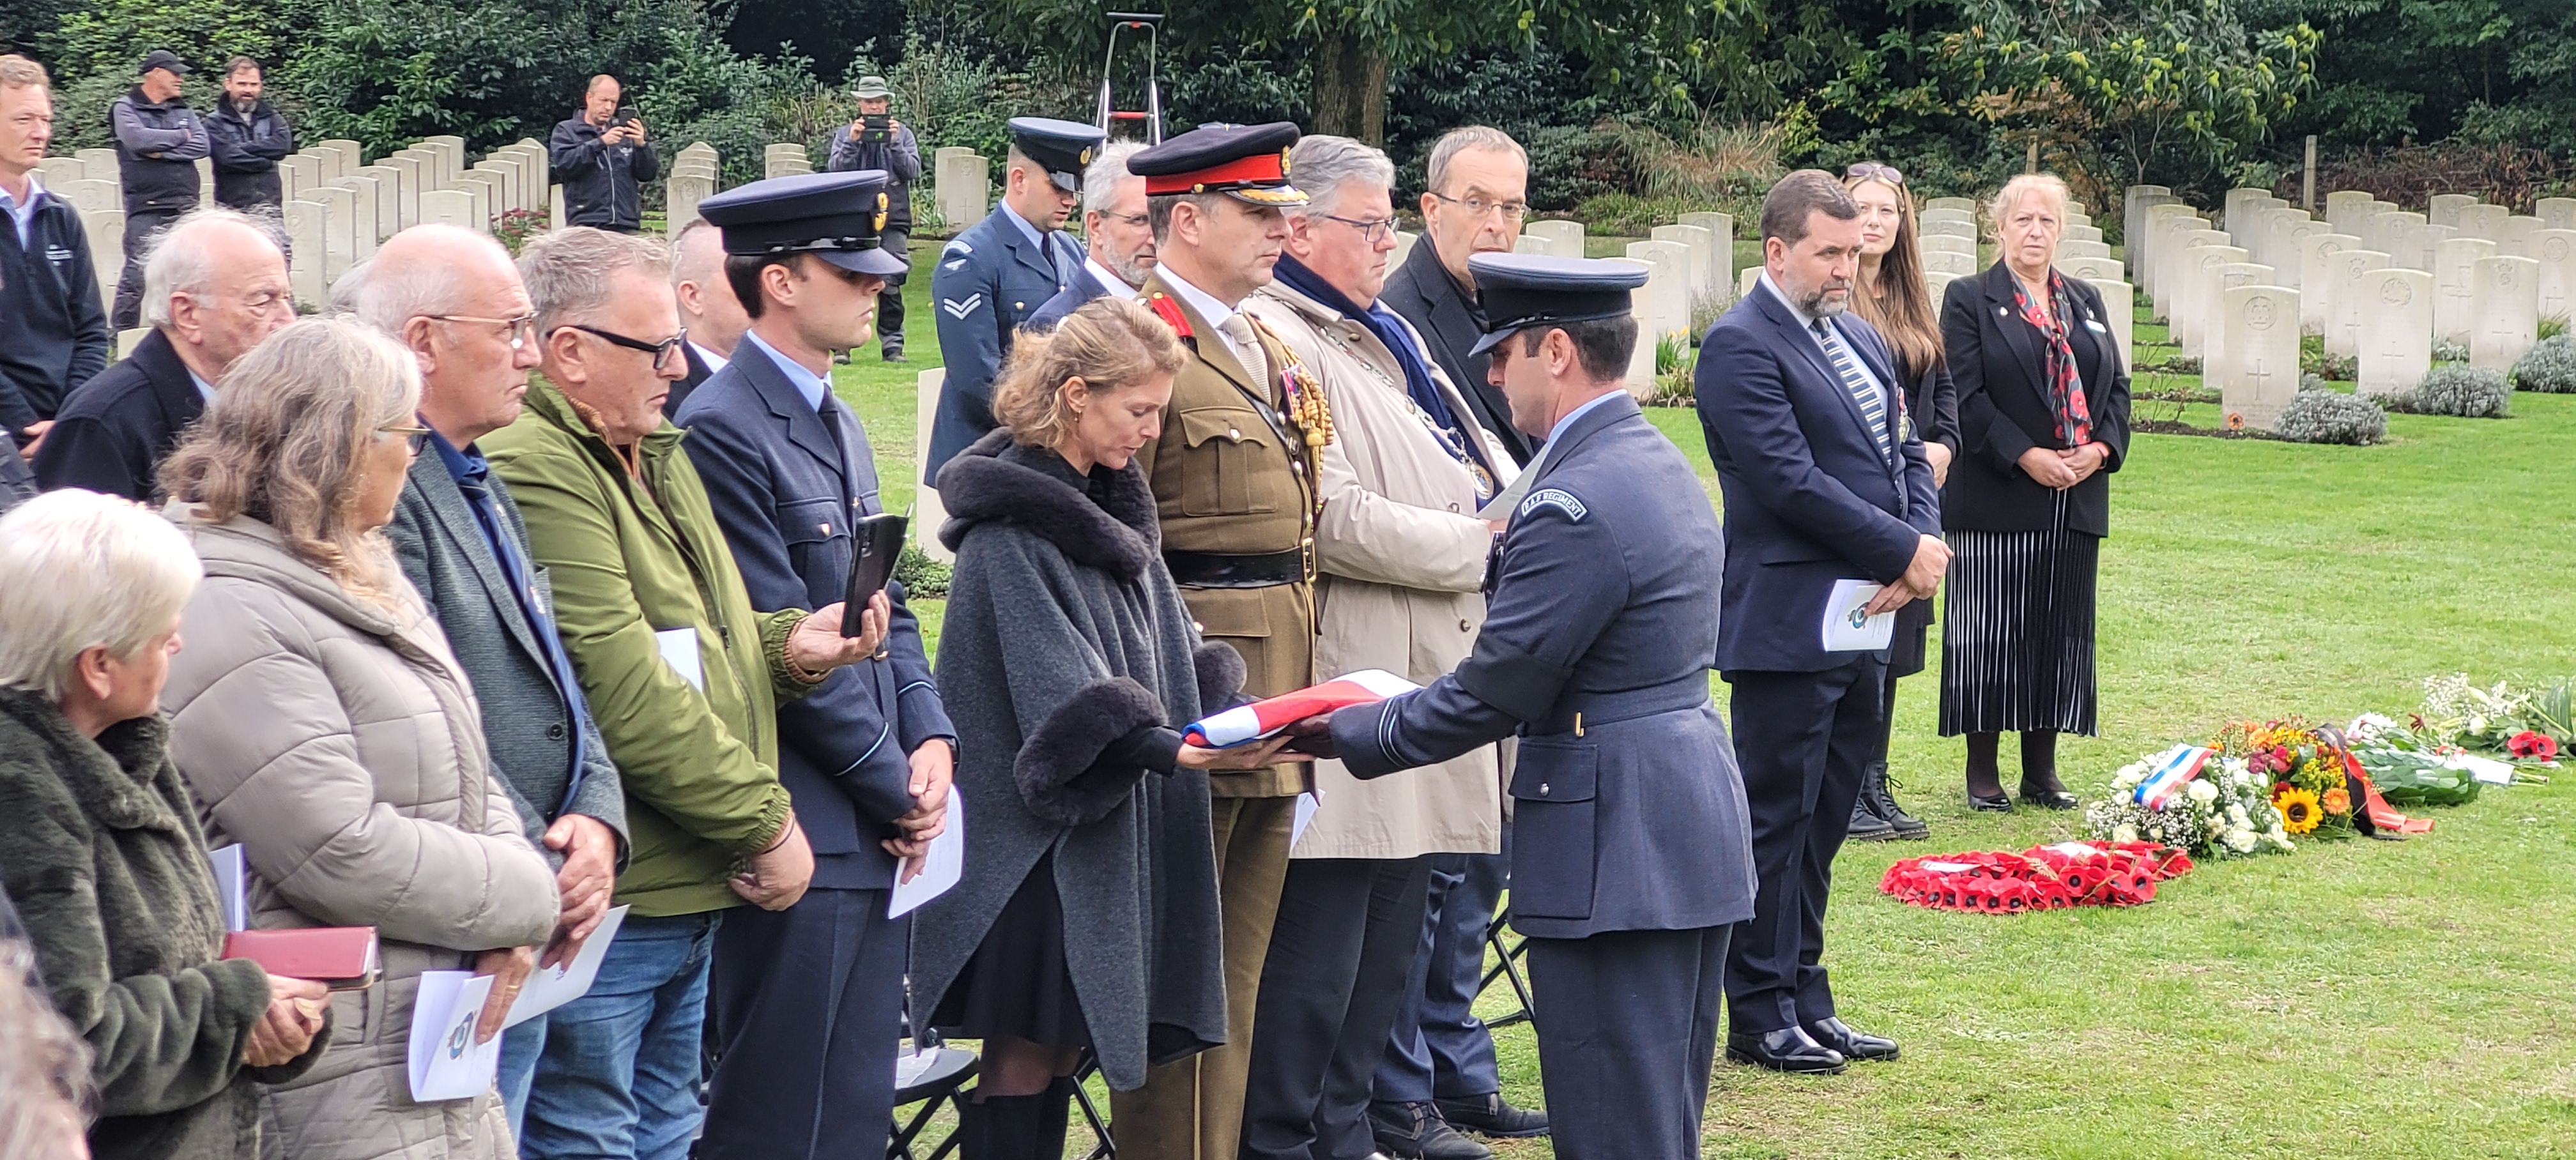 Image of RAF aviators and civilians standing in the cemetery with flower wreaths..